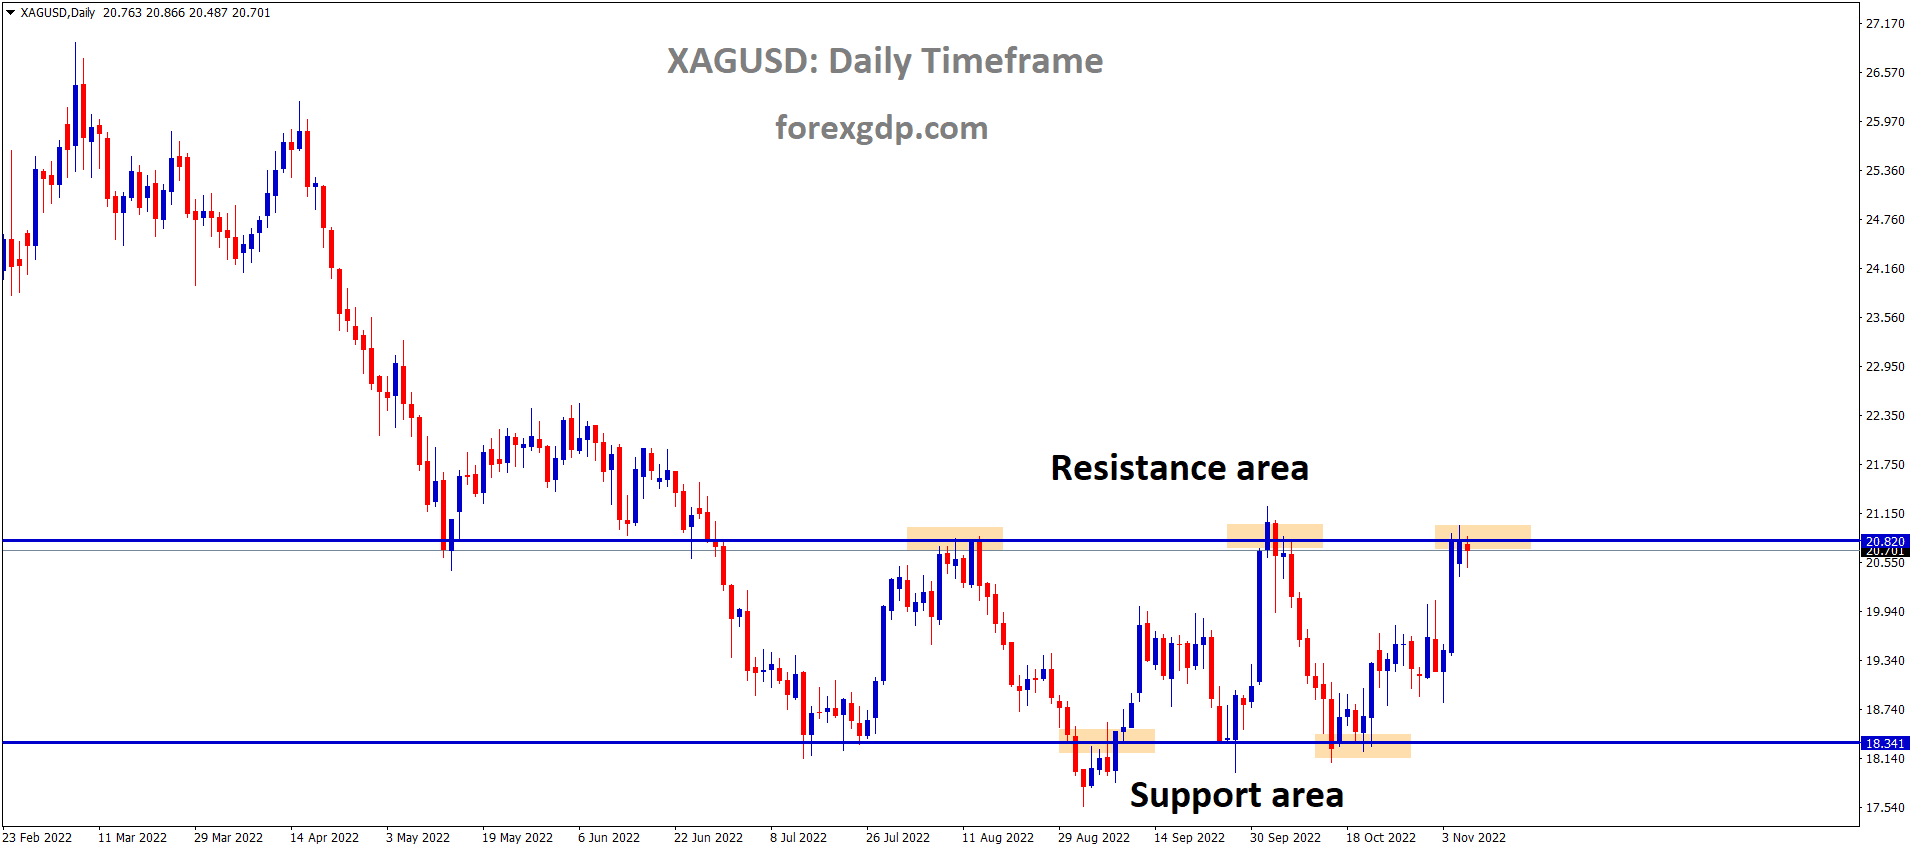 XAGUSD Silver Price is moving in the Box pattern and the market has reached the resistance area of the pattern